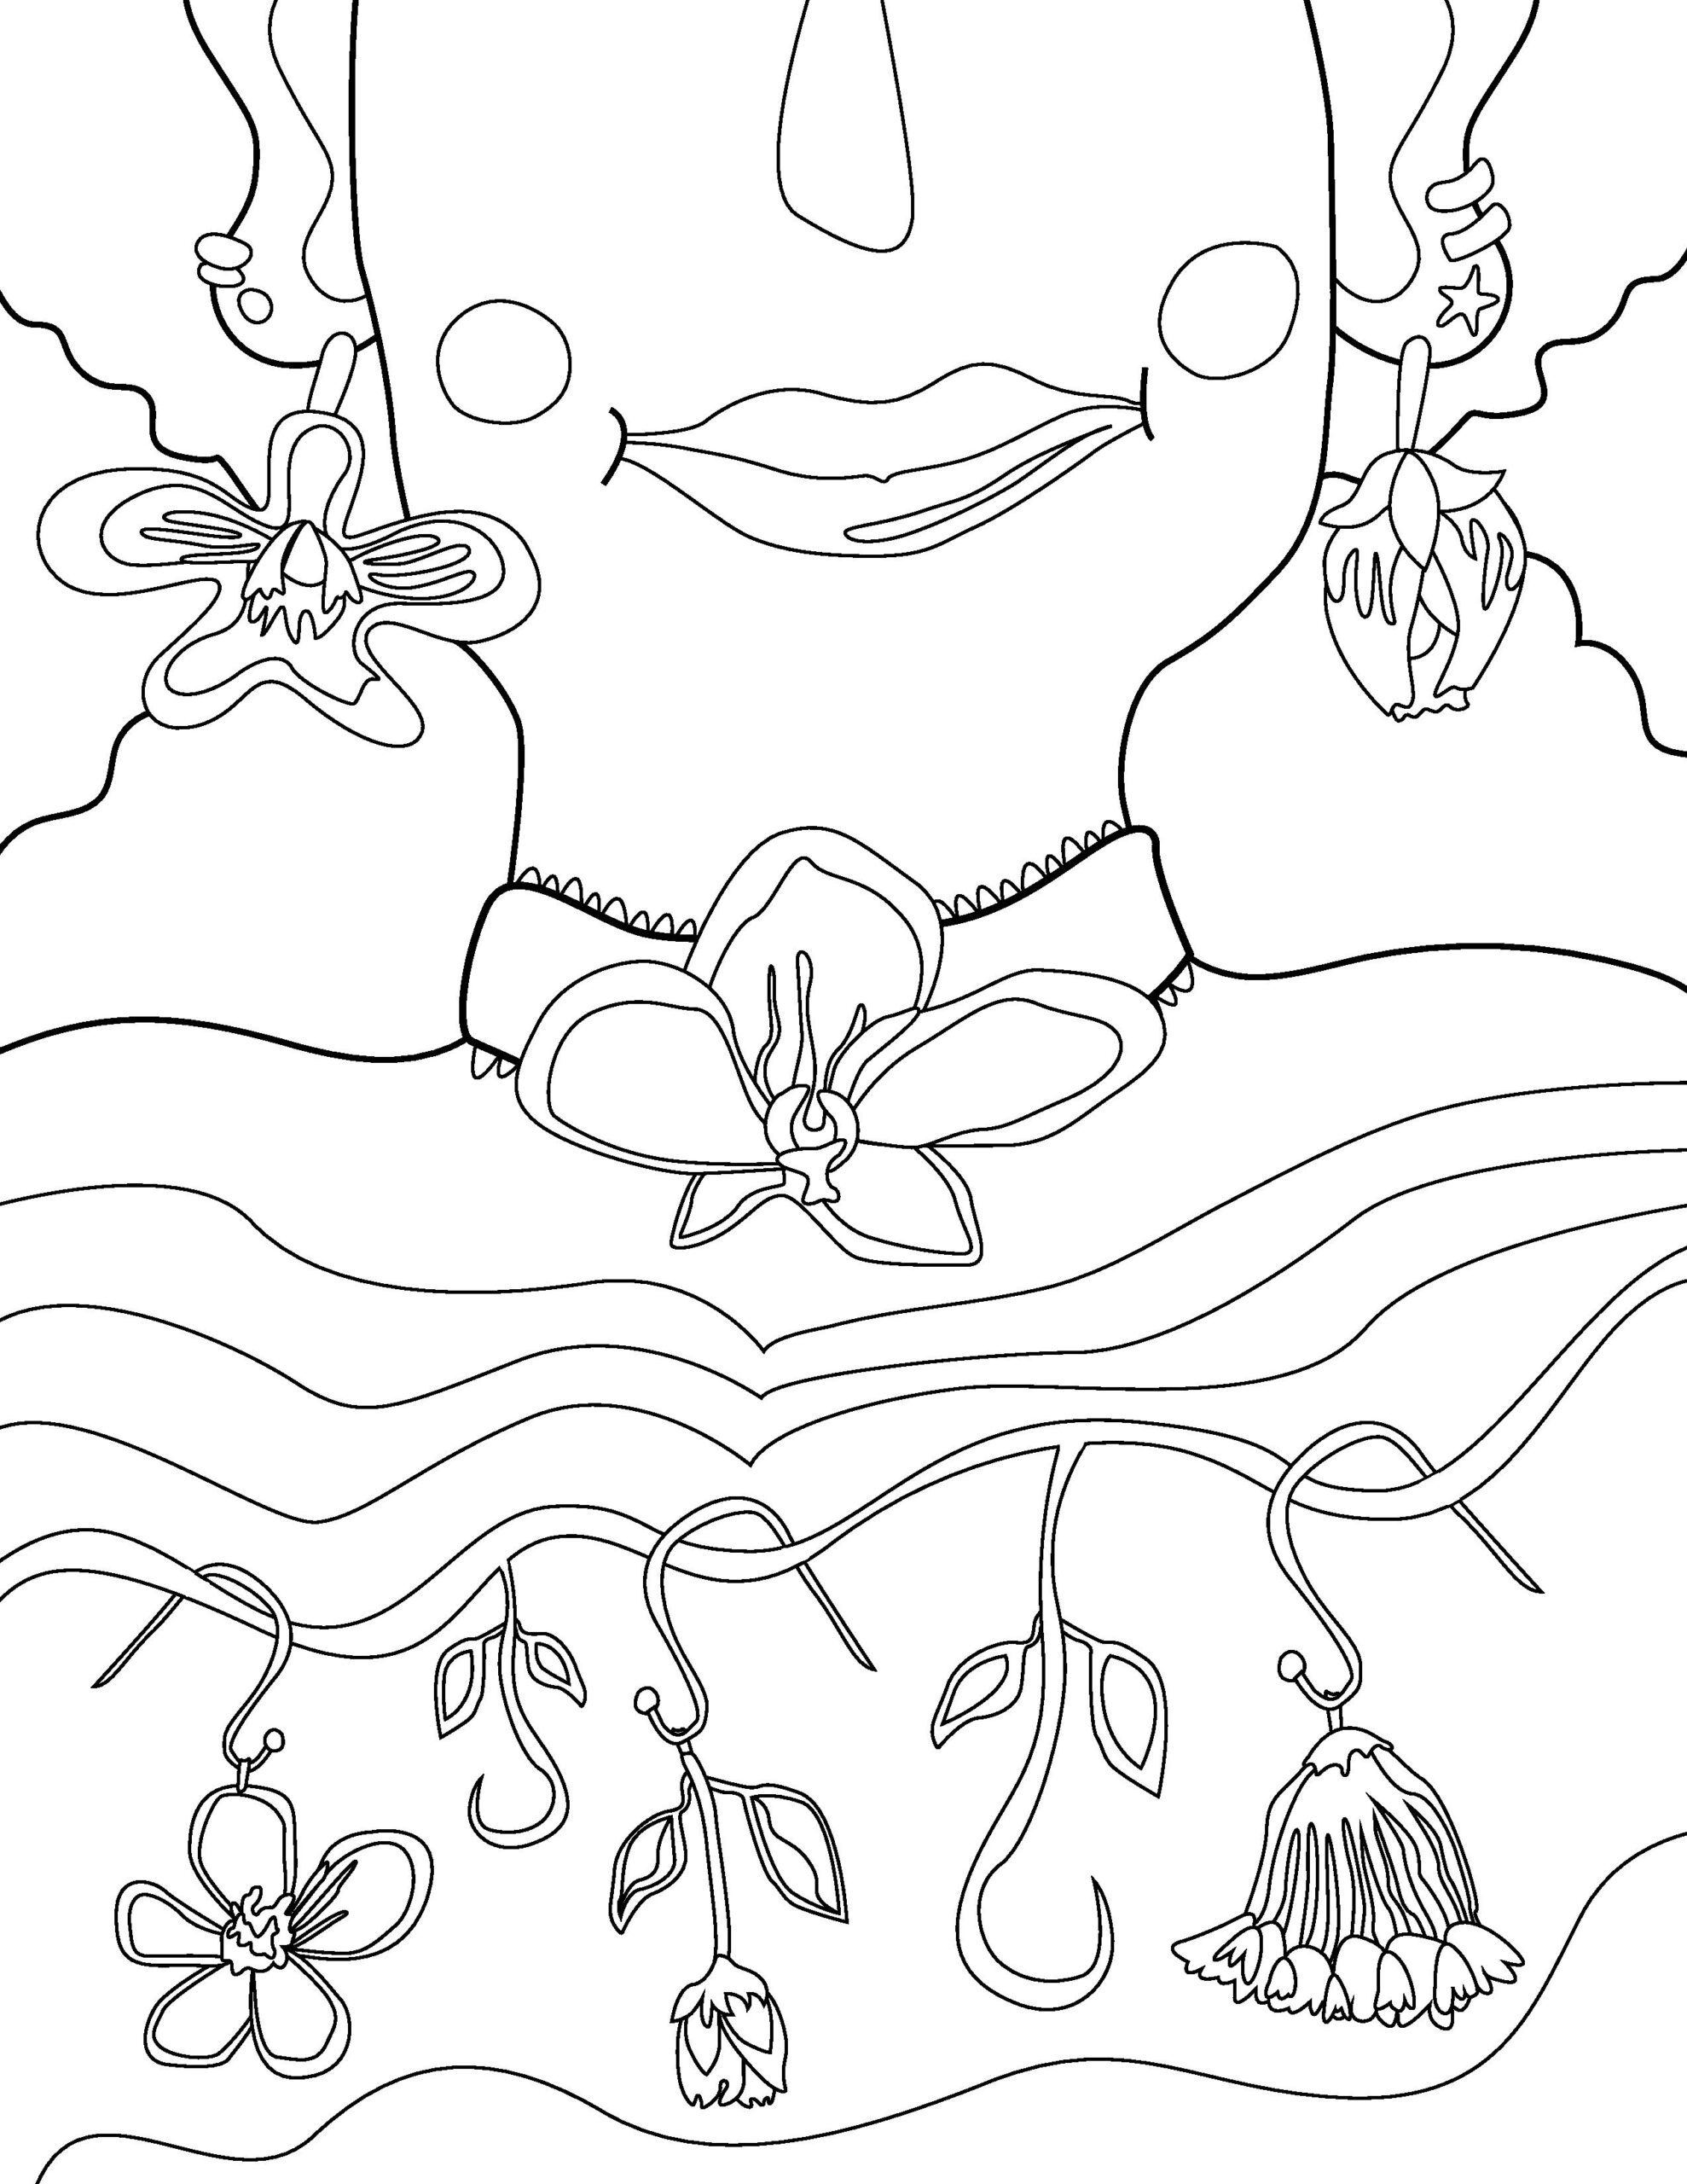 Colouring page illustration close up on a figure's upper chest, neck and lower face. The figure wears floral jewelry.